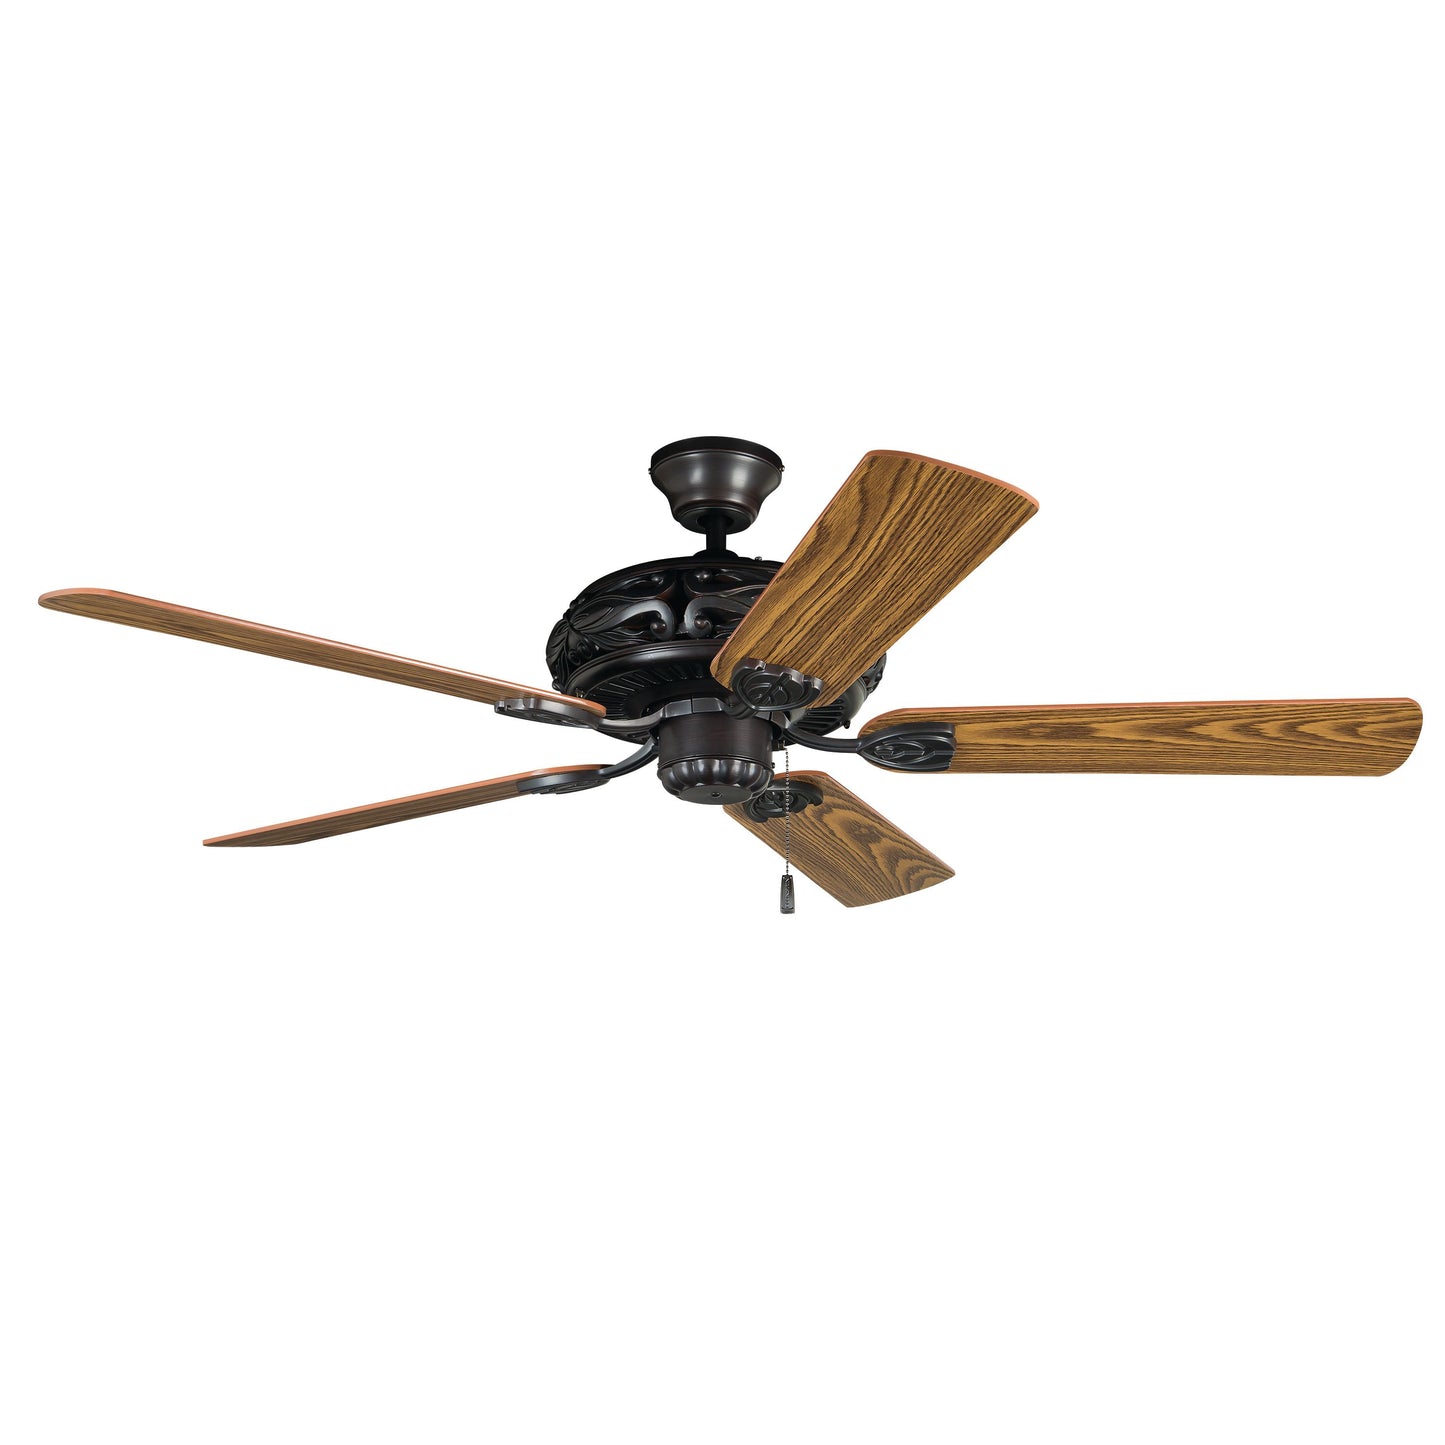 GD52ABZ5C - Grandeur 52" 5 Blade Ceiling Fan with Light Kit - Pull Chain - Aged Bronze Brushed